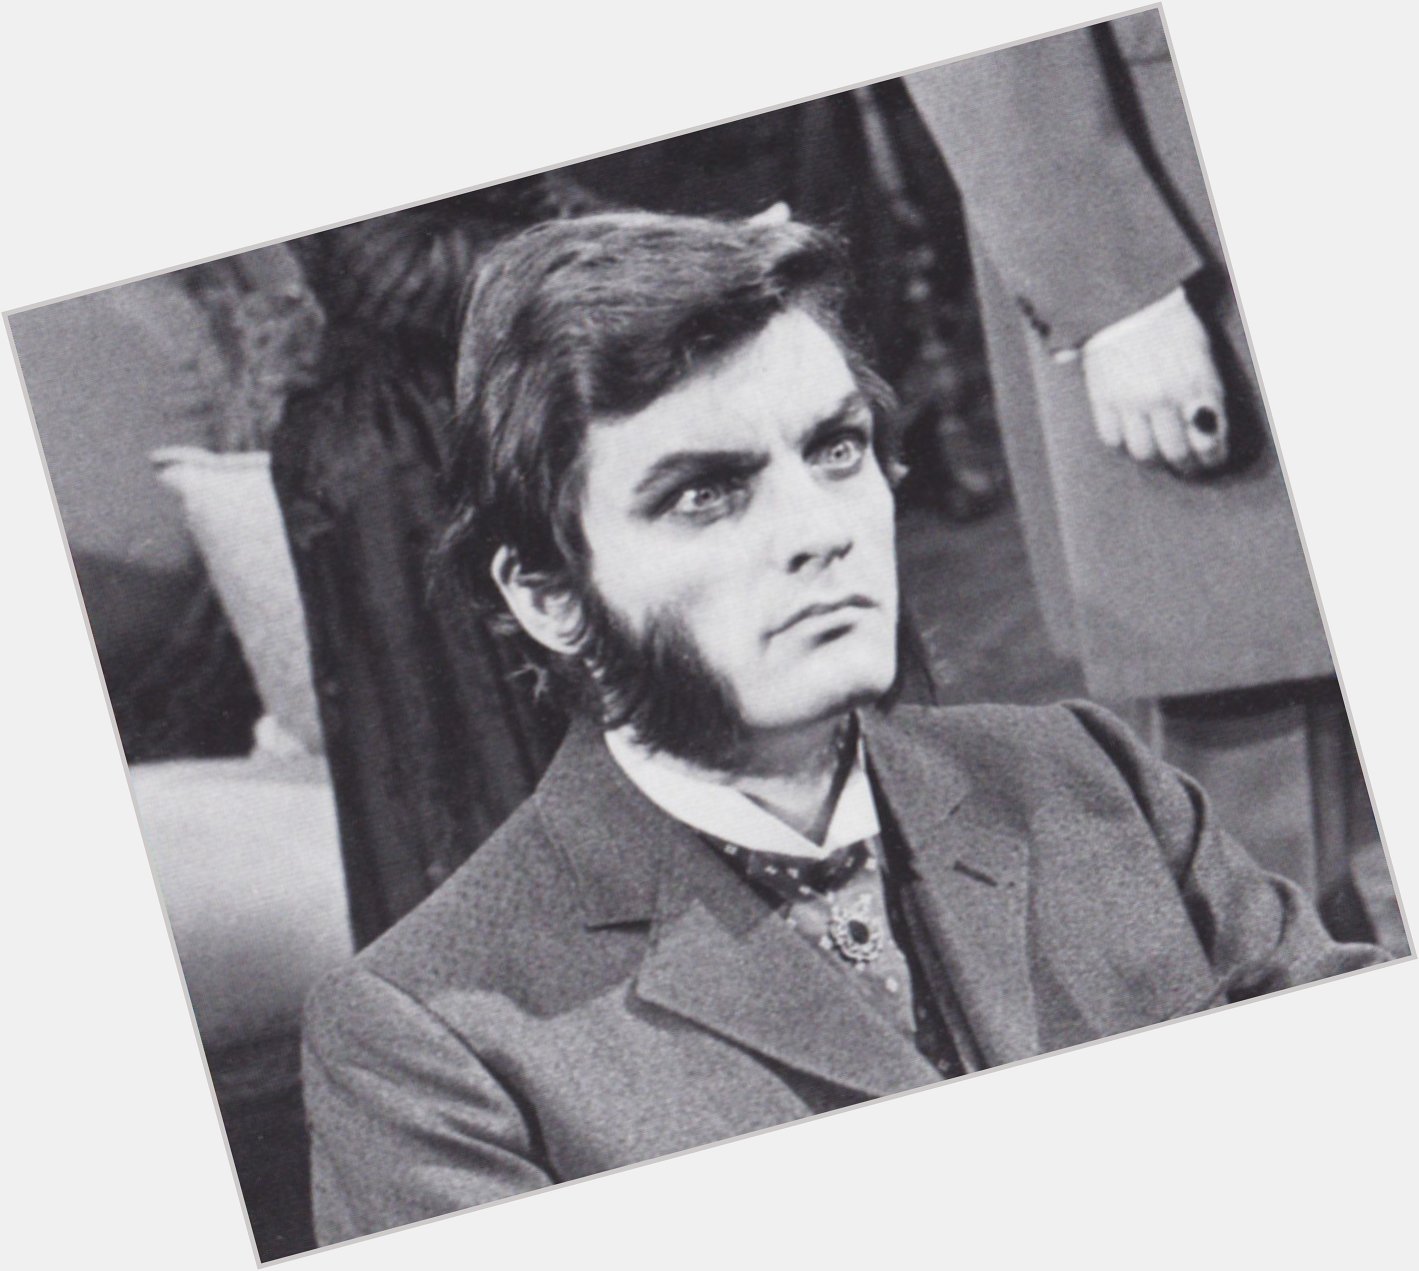 Time stands still for the great David Selby...grand actor...grand human being. Happy Birthday, David! 